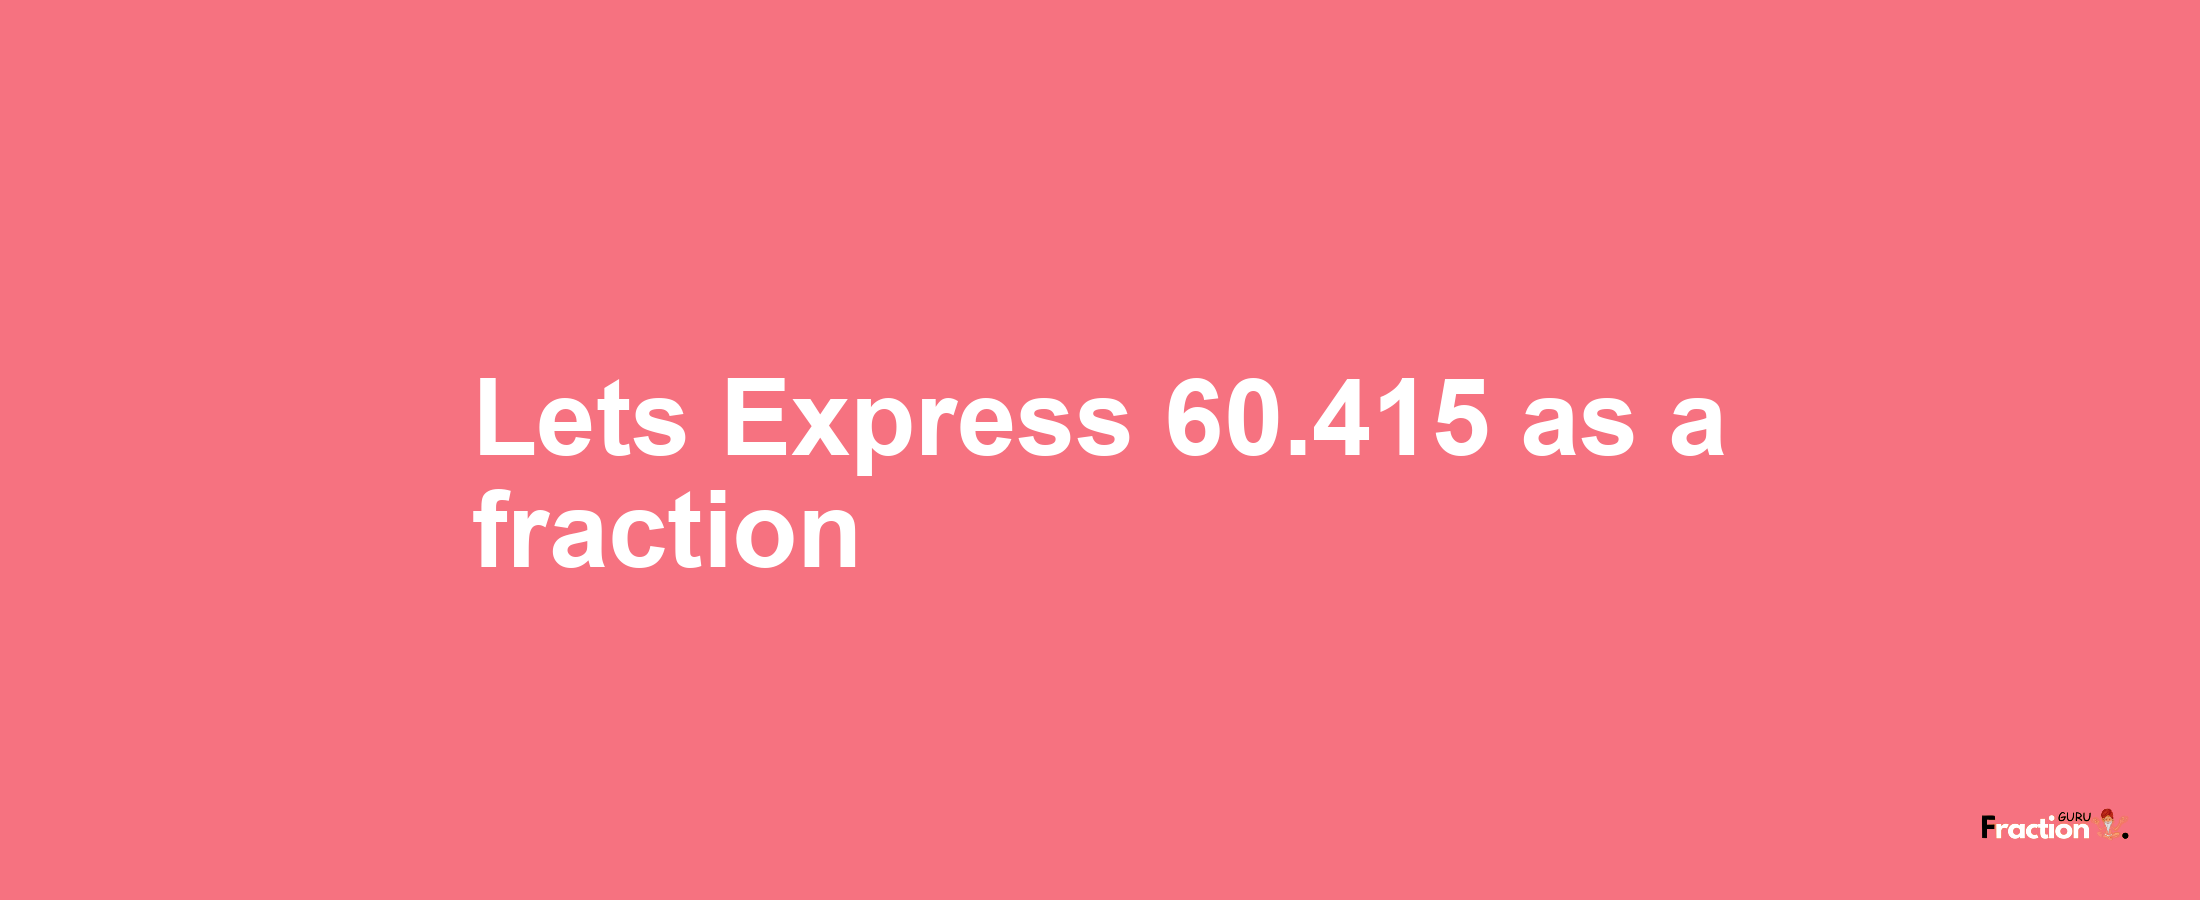 Lets Express 60.415 as afraction